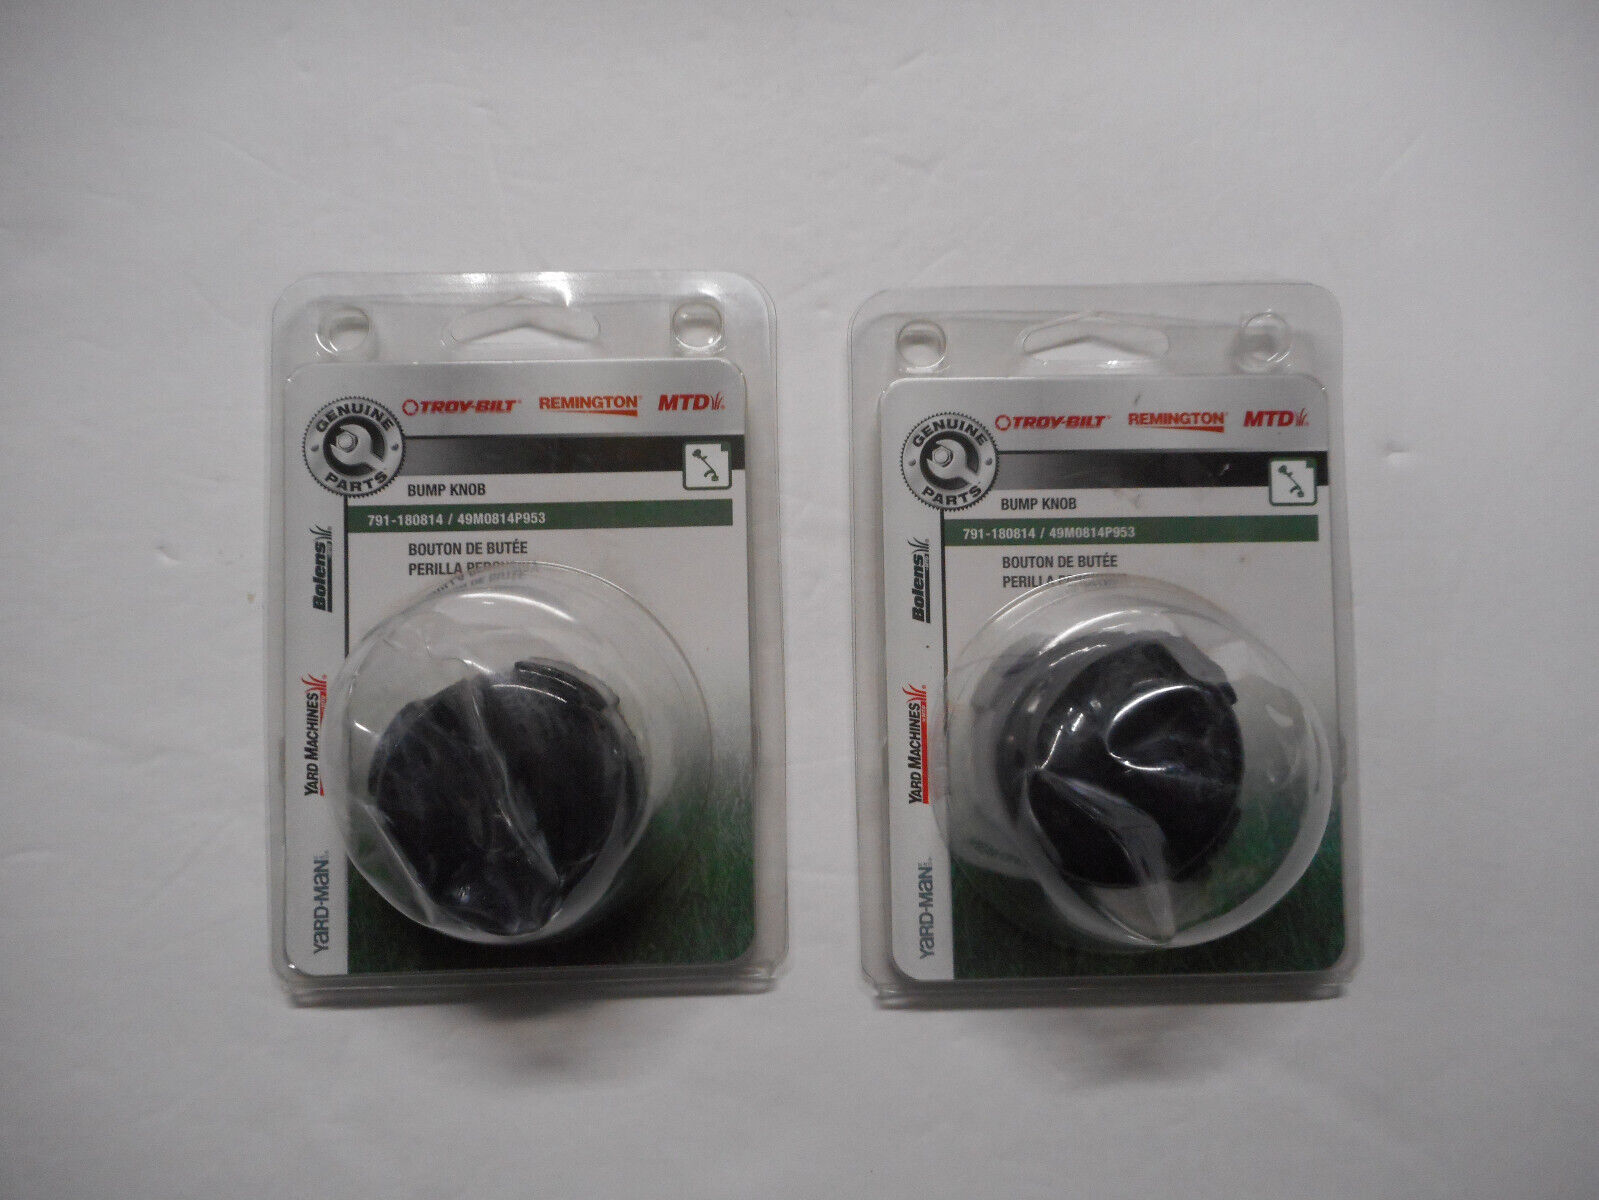 Group Of (2) MTD Bump Knobs #791-180814/49M0814P953. New. Sealed Pkg.